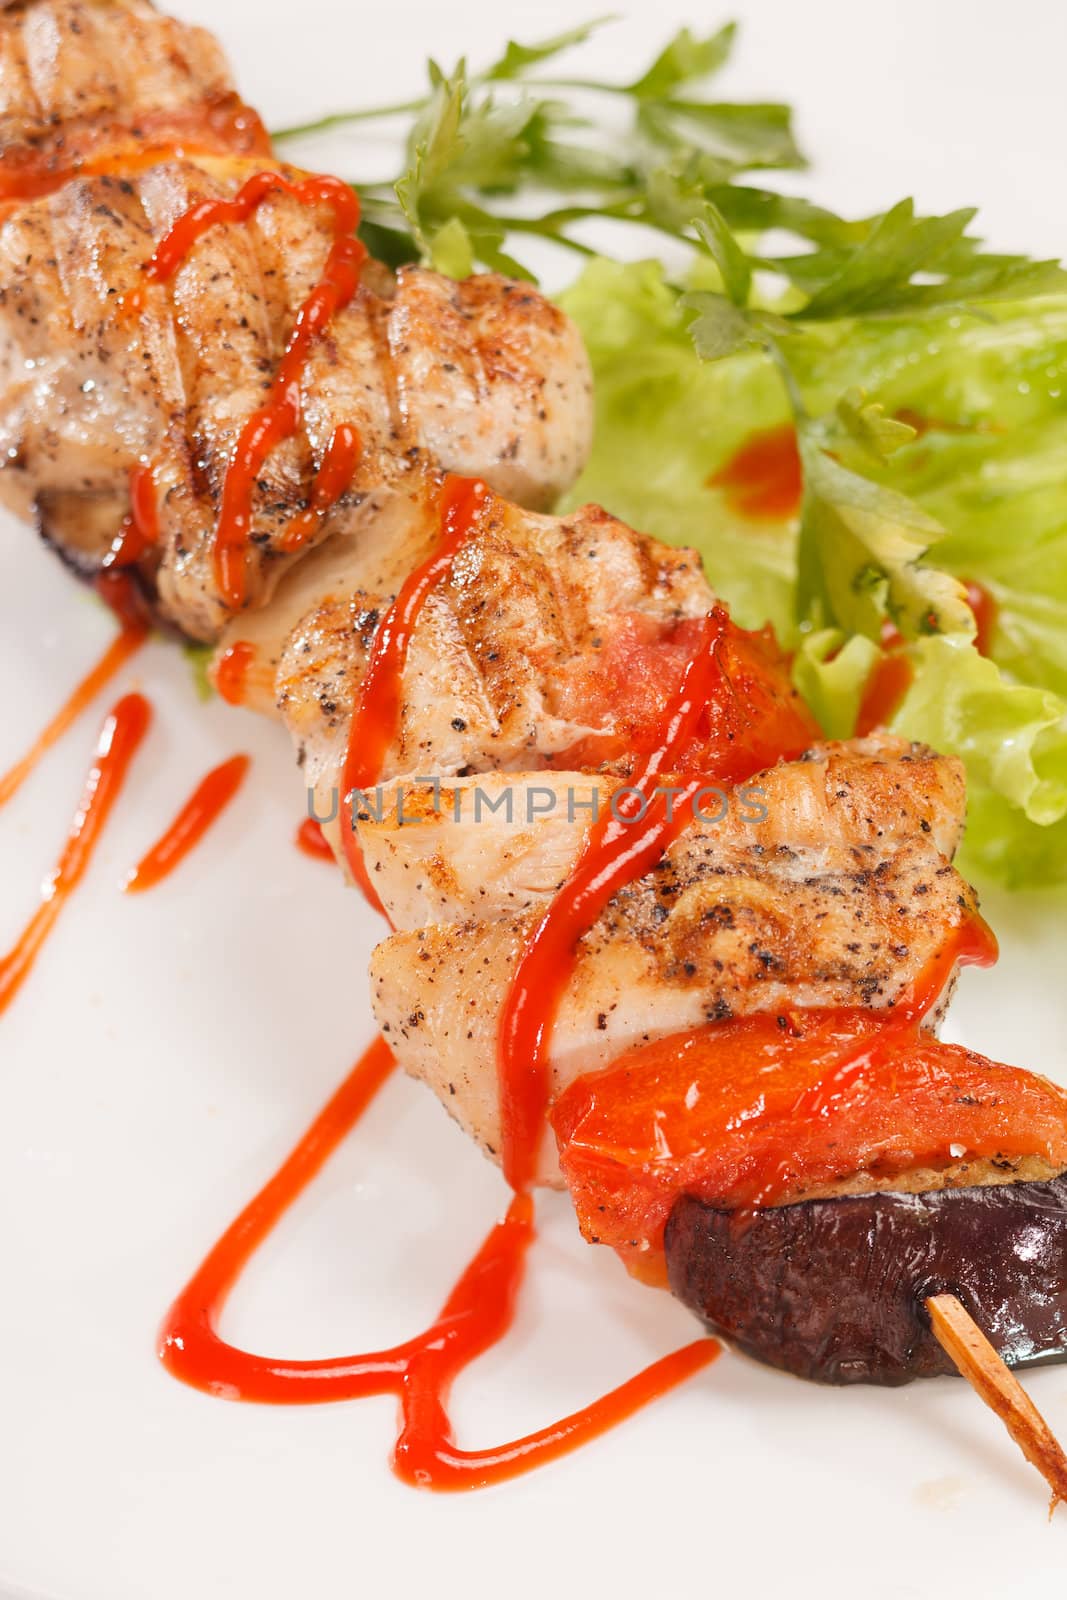 Chicken kebab with tomato sauce by shebeko